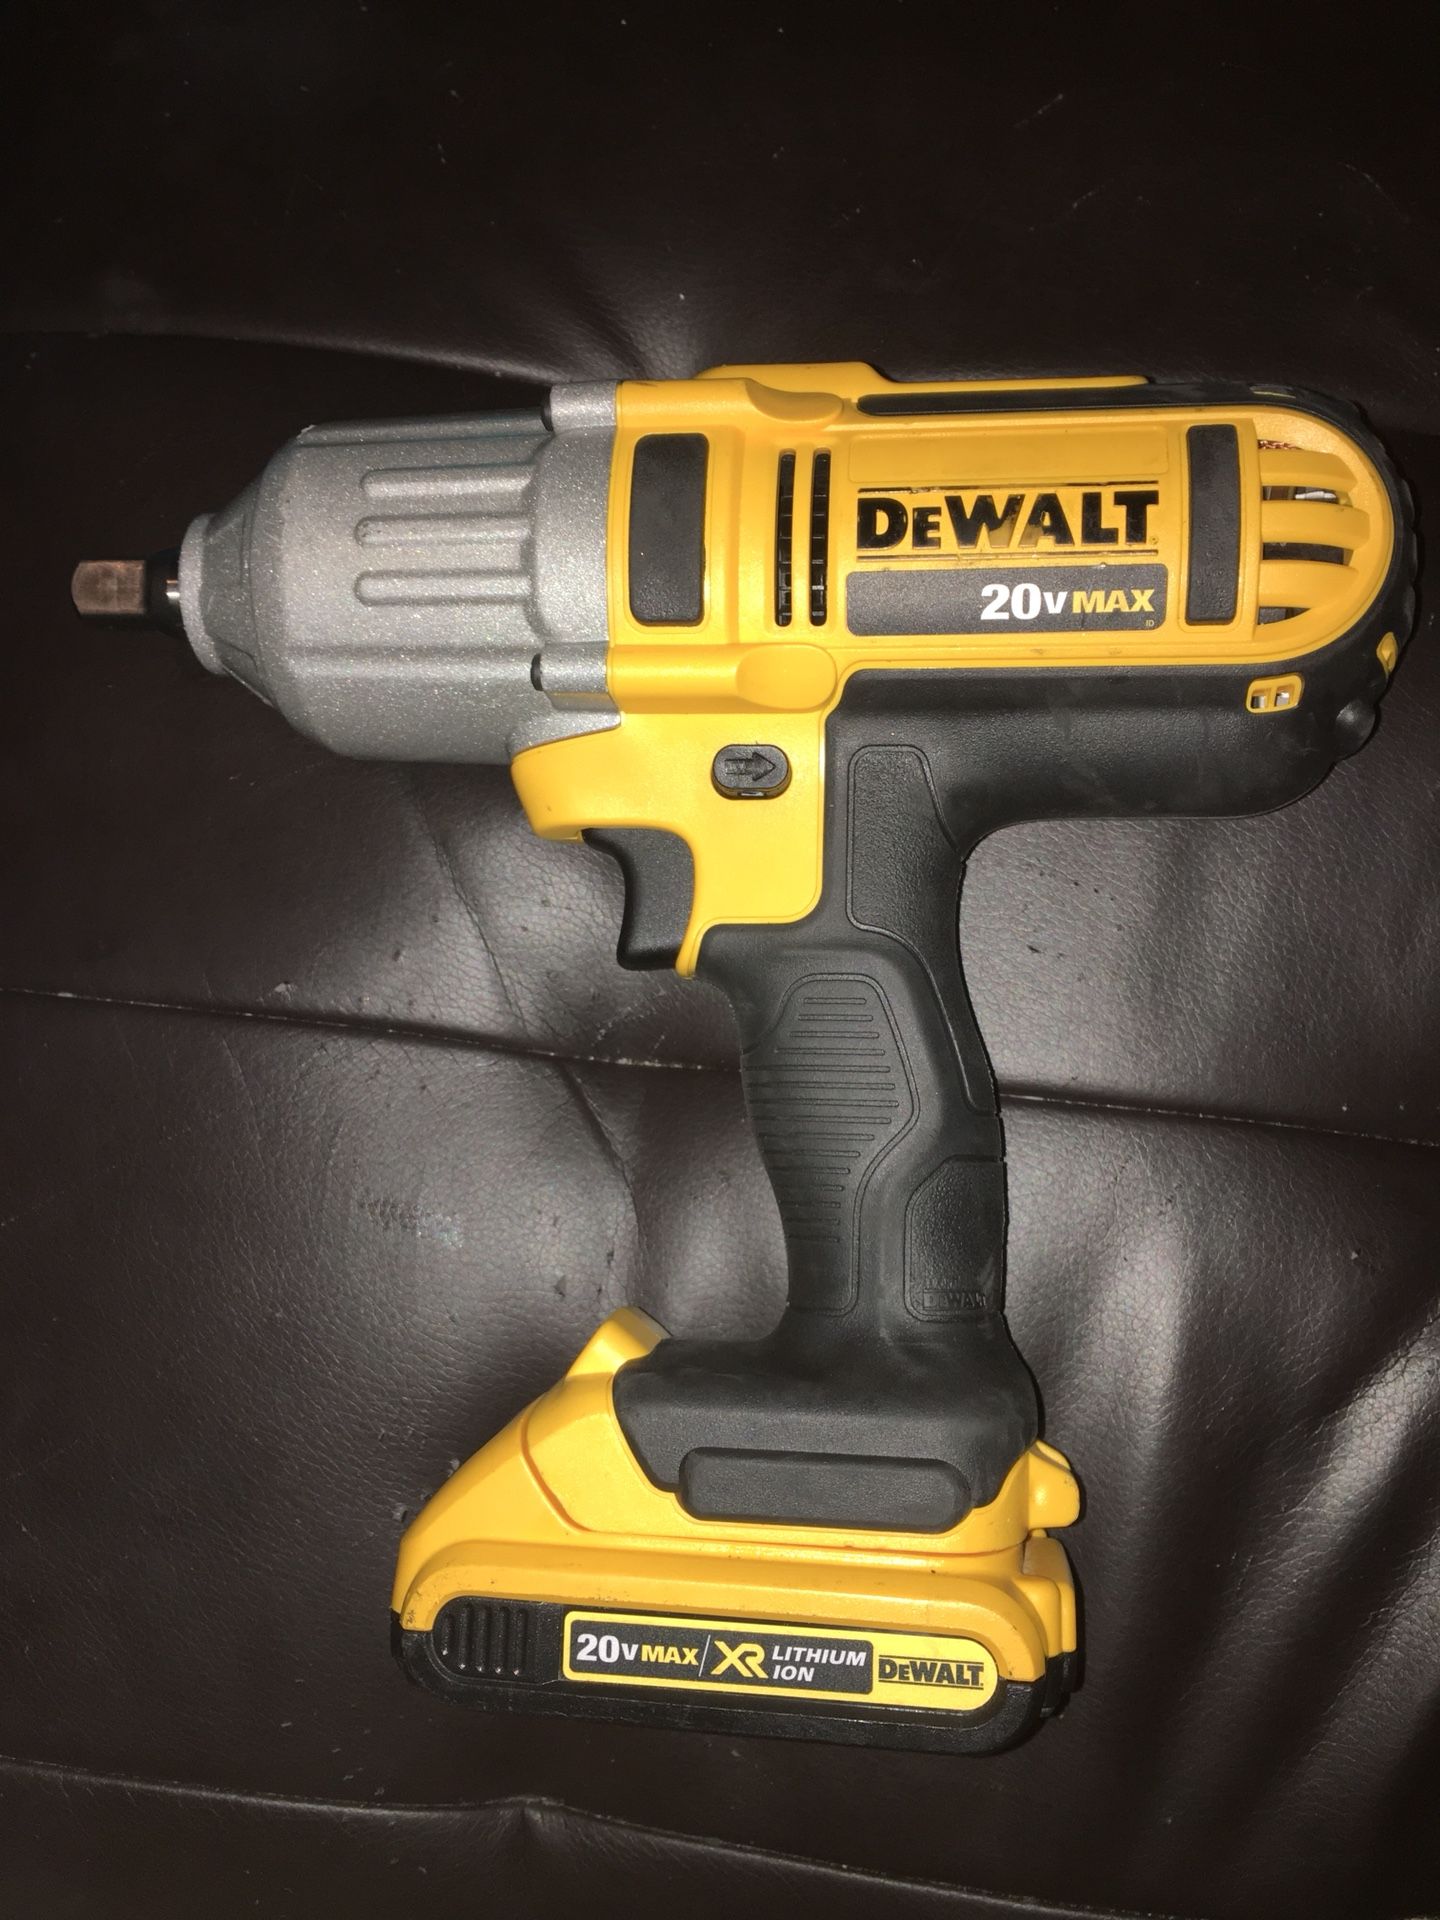 DEWALT XR 20-volt Max 1/2-in Drive Cordless Impact Wrench (1-Battery Included) Included